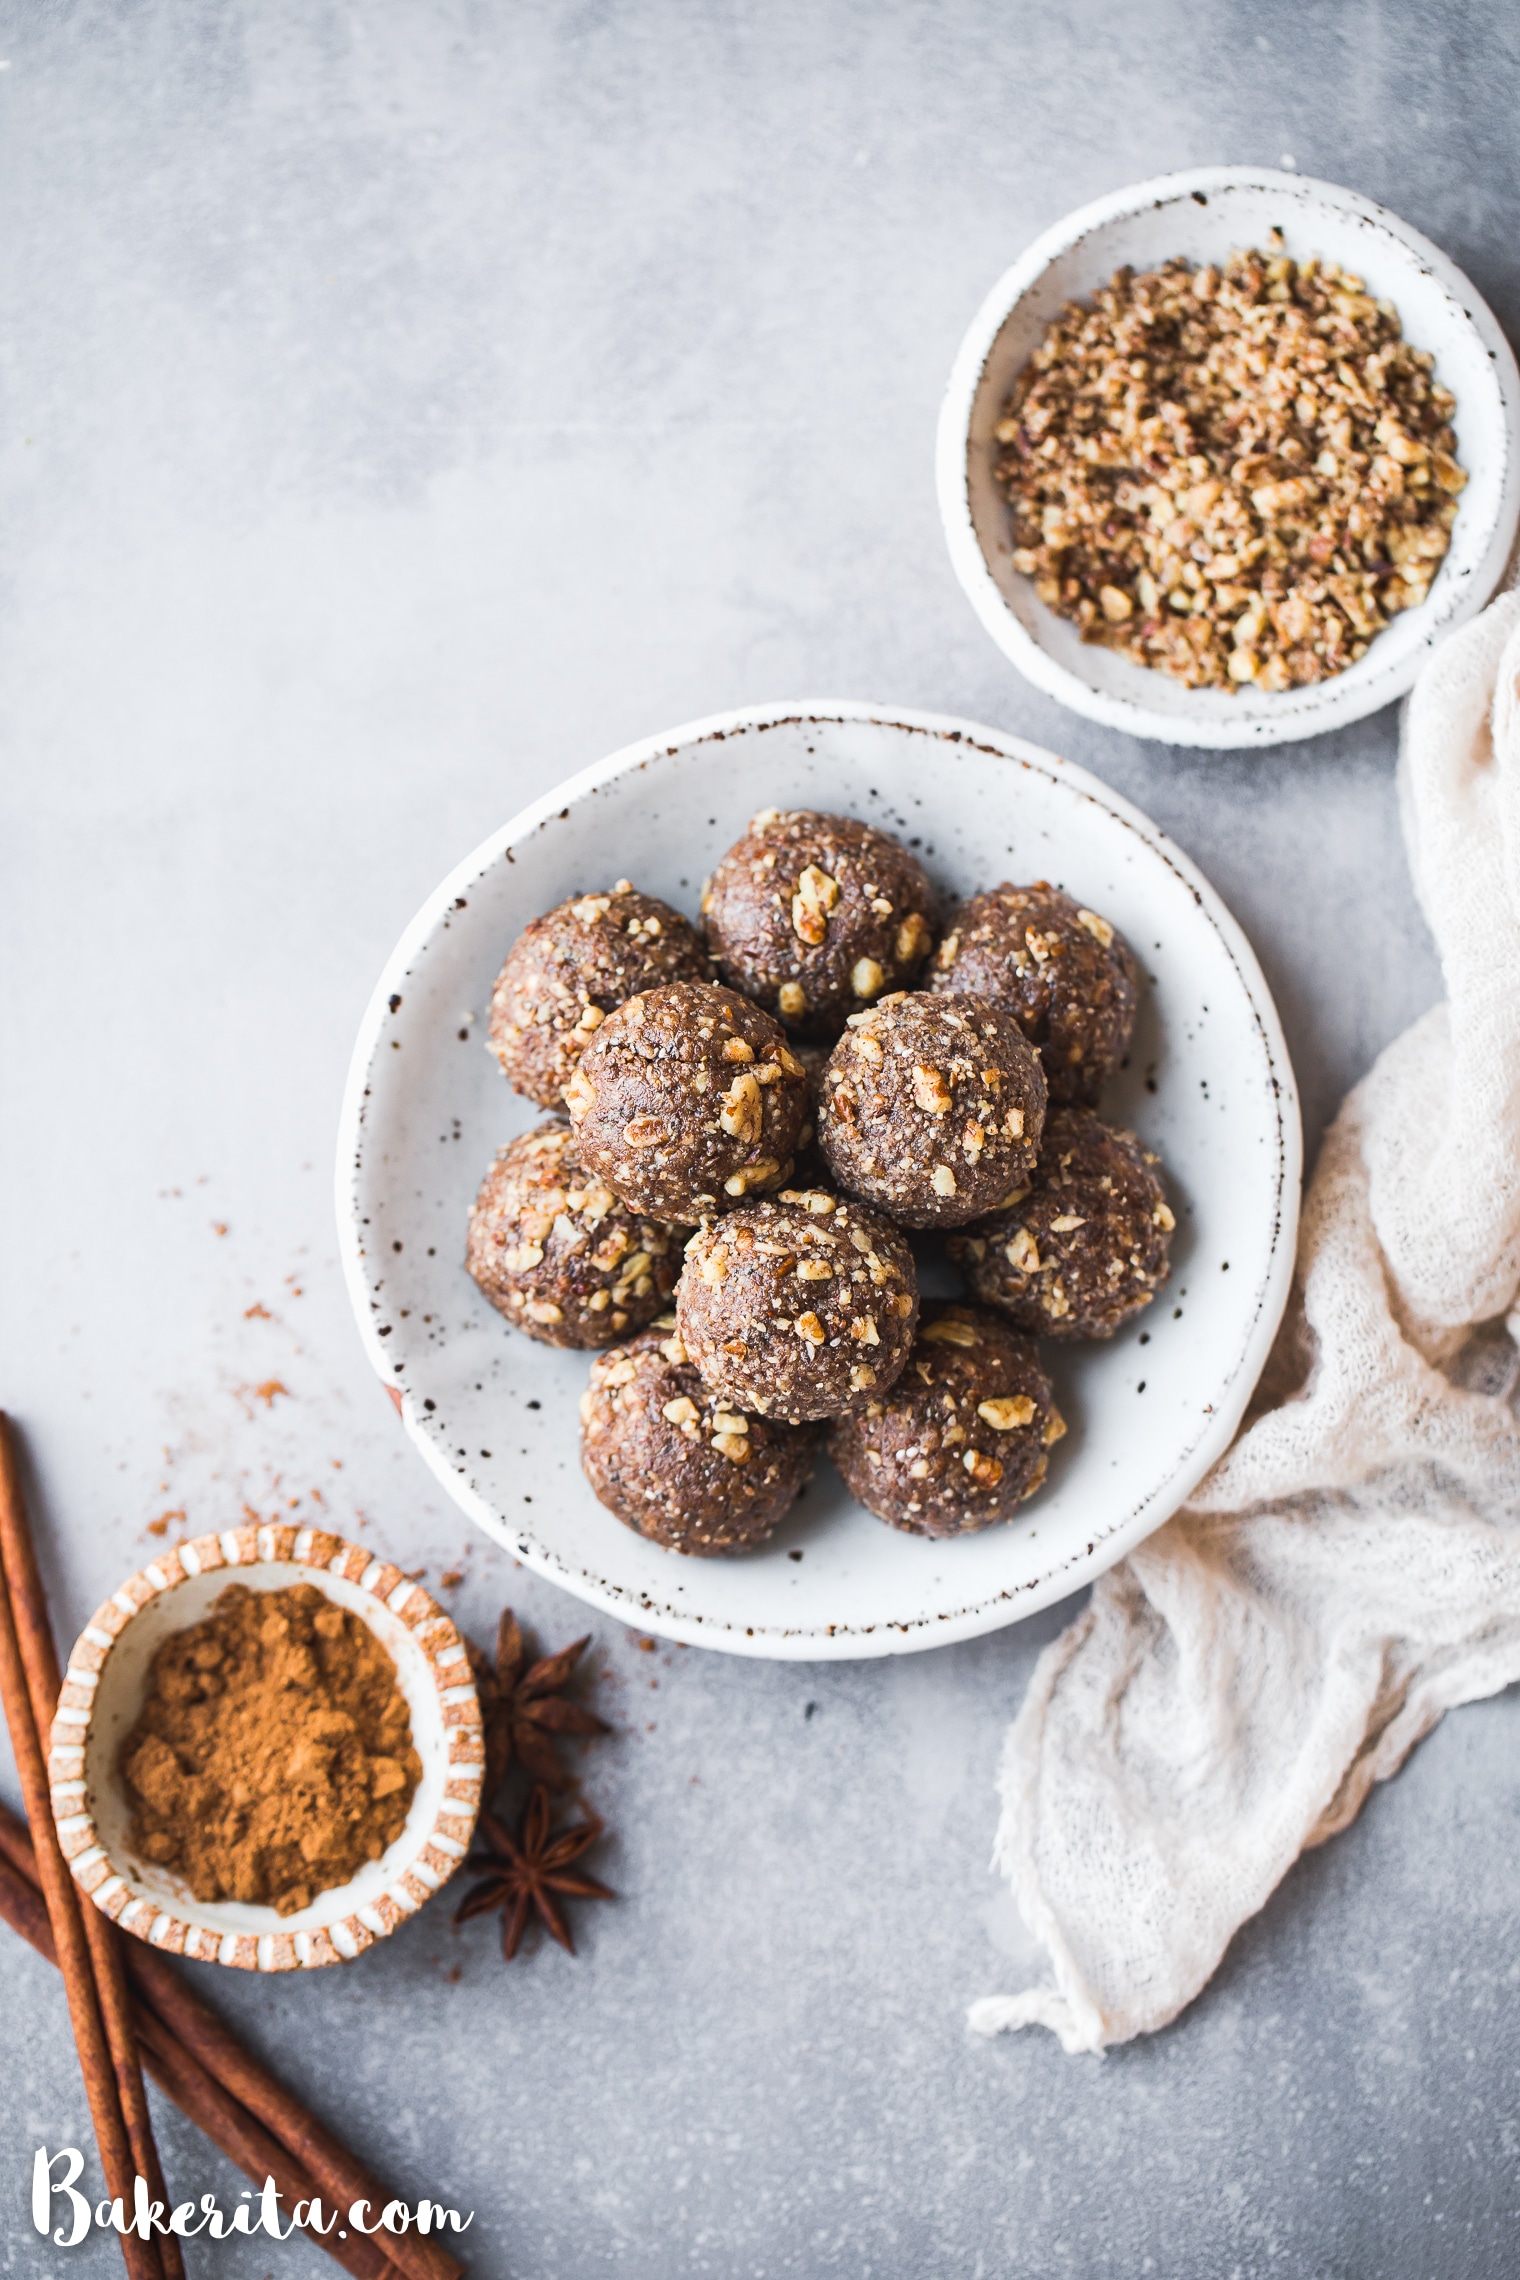 These Pumpkin Spice Energy Bites are full of healthy fats, protein, and of course, delicious pumpkin spice flavor! These Vegan, Paleo, Keto, and Whole30-friendly energy balls will keep you going when hunger hits.